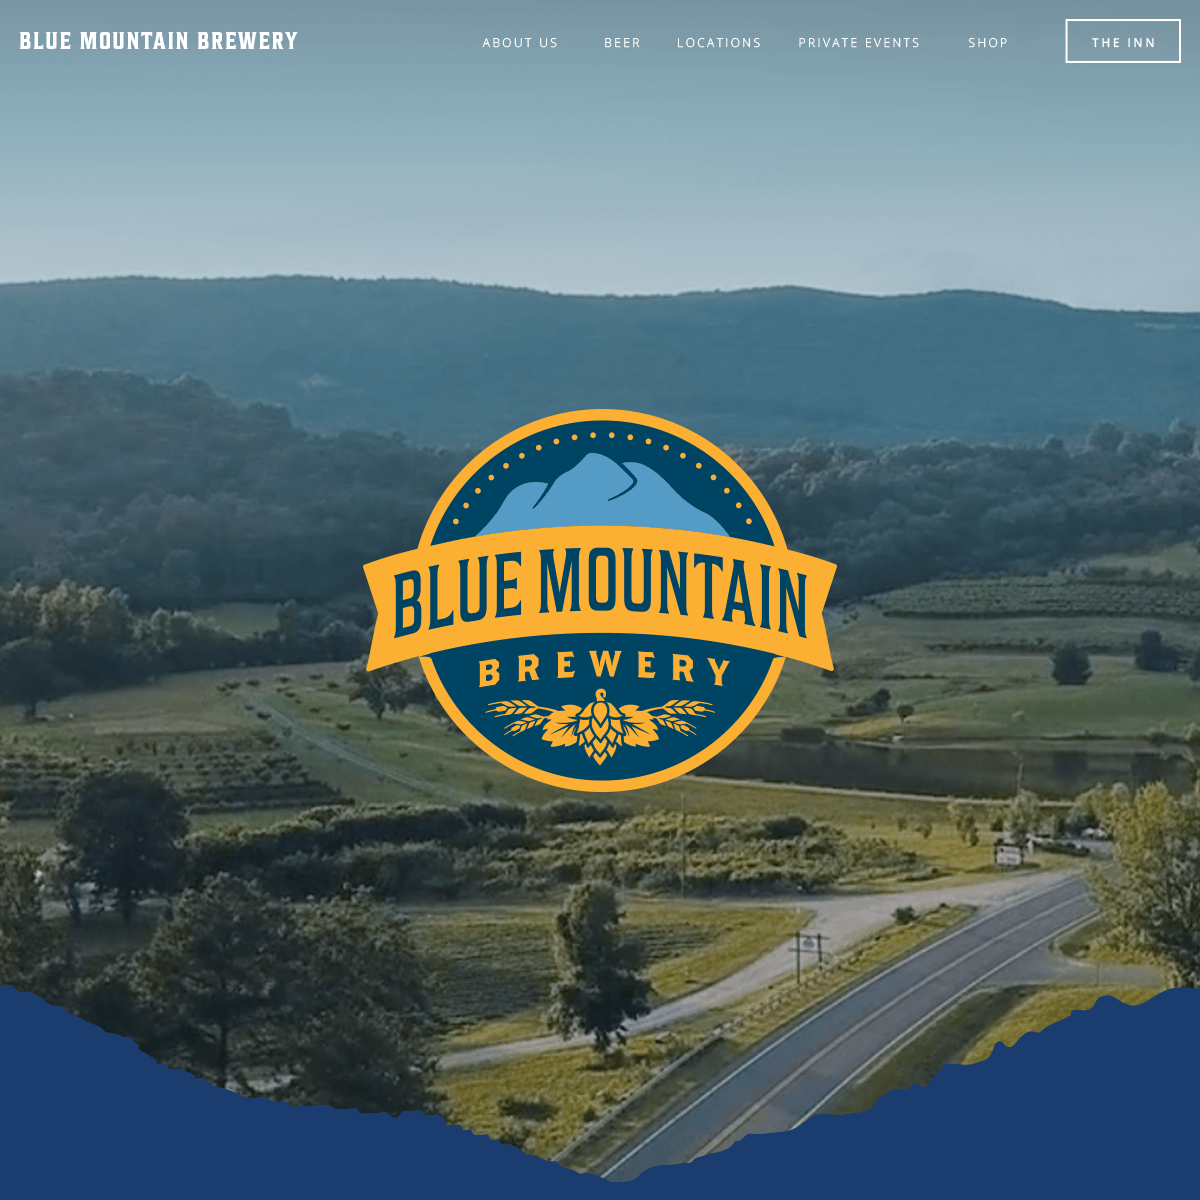 Pink and Blue Mountains Brand Logo - Blue Mountain Brewery